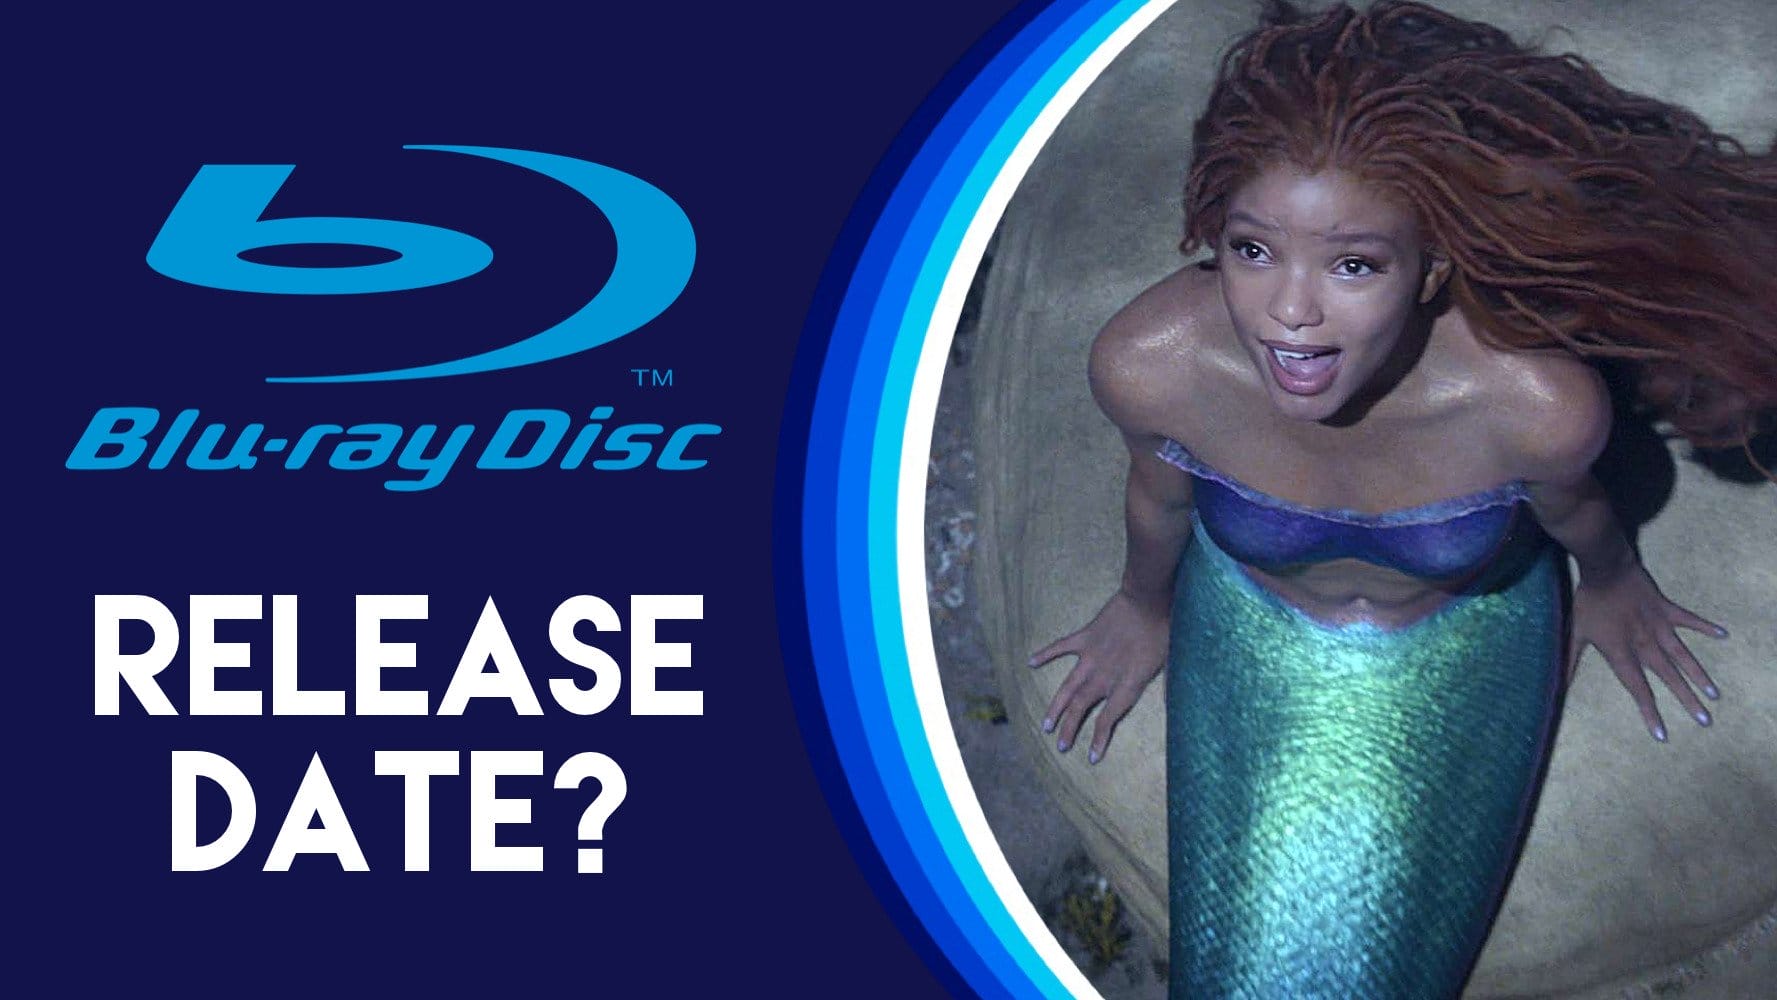 When is New 'The Little Mermaid' Coming To Blu-Ray? - Disney Plus